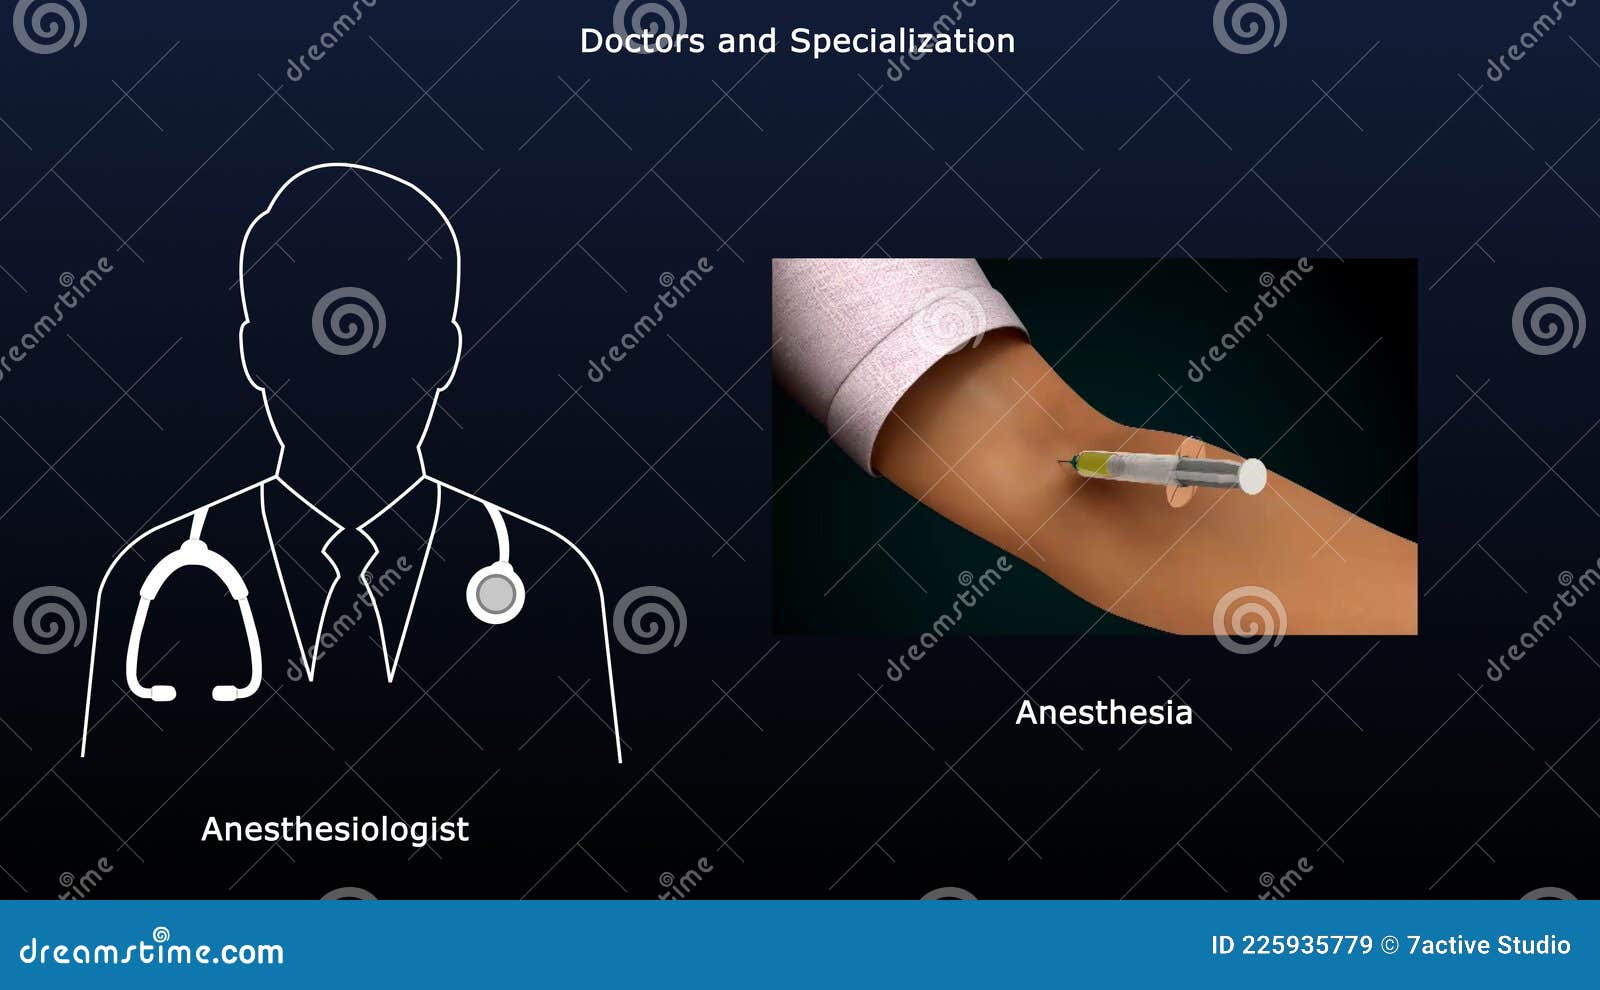 anesthesiologist - doctor and specialization of anesthesia